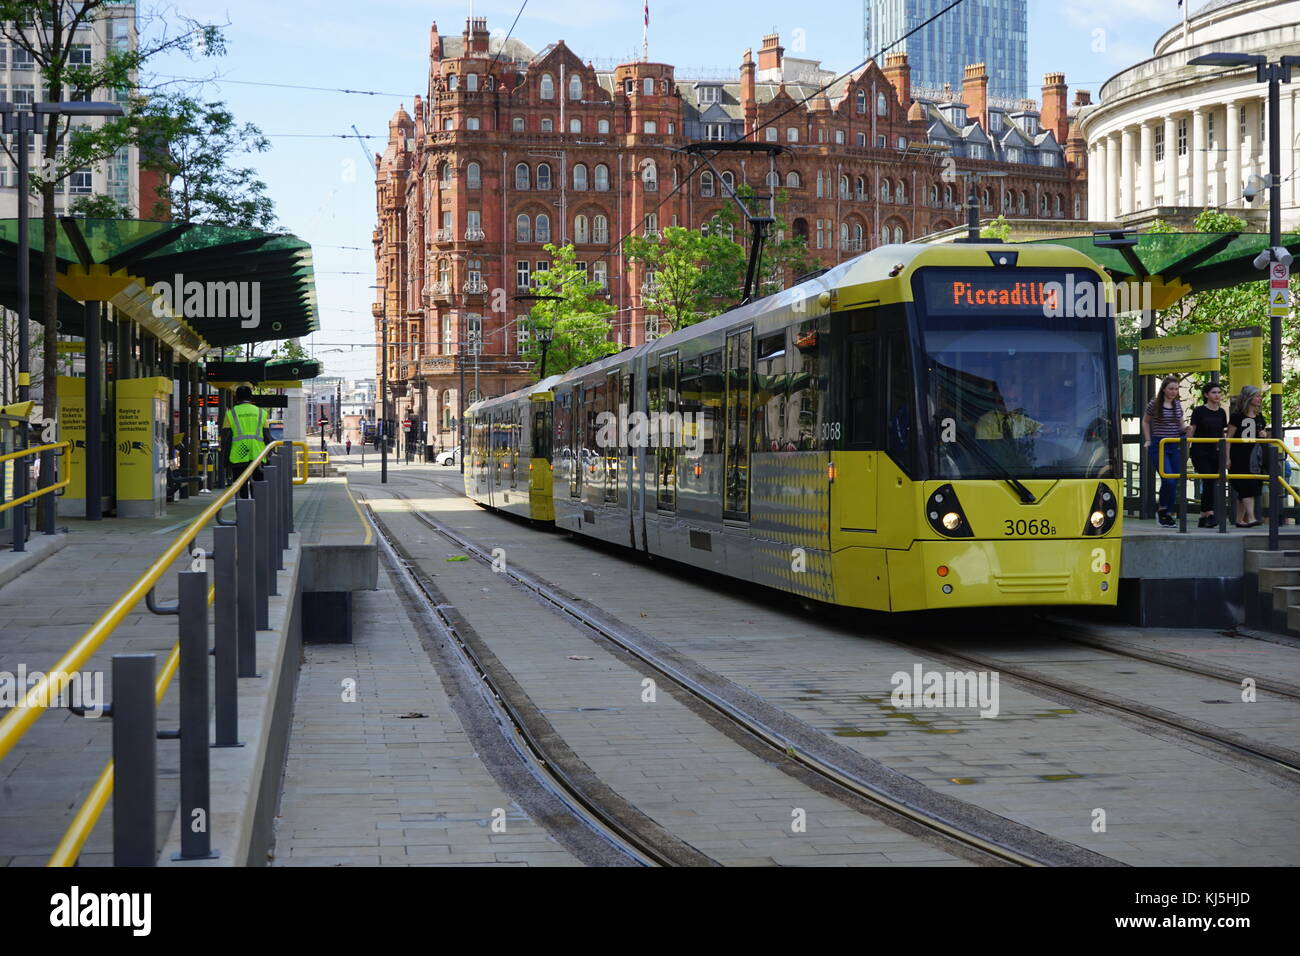 Metrolink (also known as Manchester Metrolink) tram/light rail system in Greater Manchester, England. 2017 Stock Photo